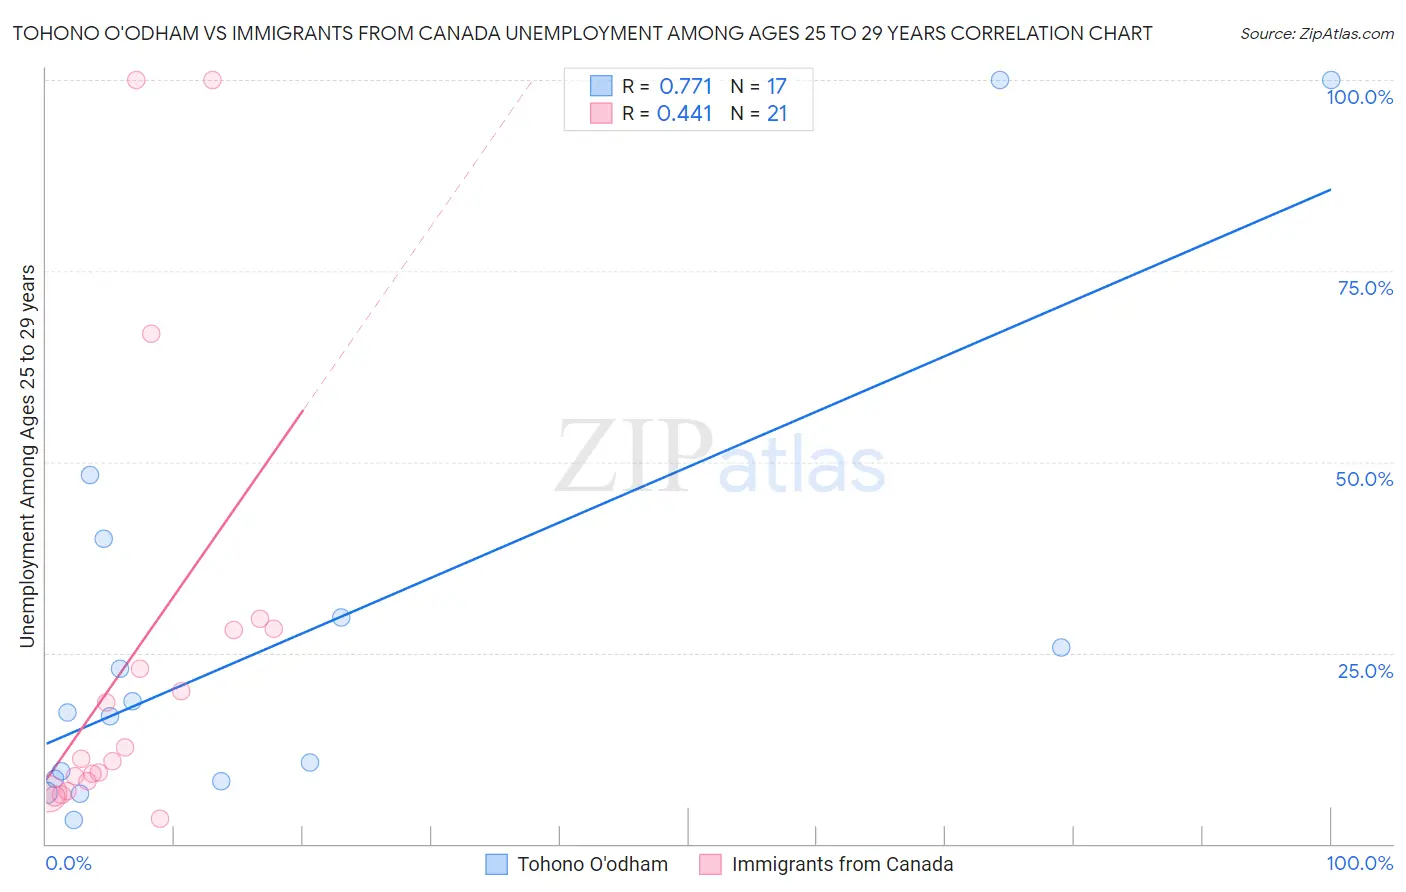 Tohono O'odham vs Immigrants from Canada Unemployment Among Ages 25 to 29 years